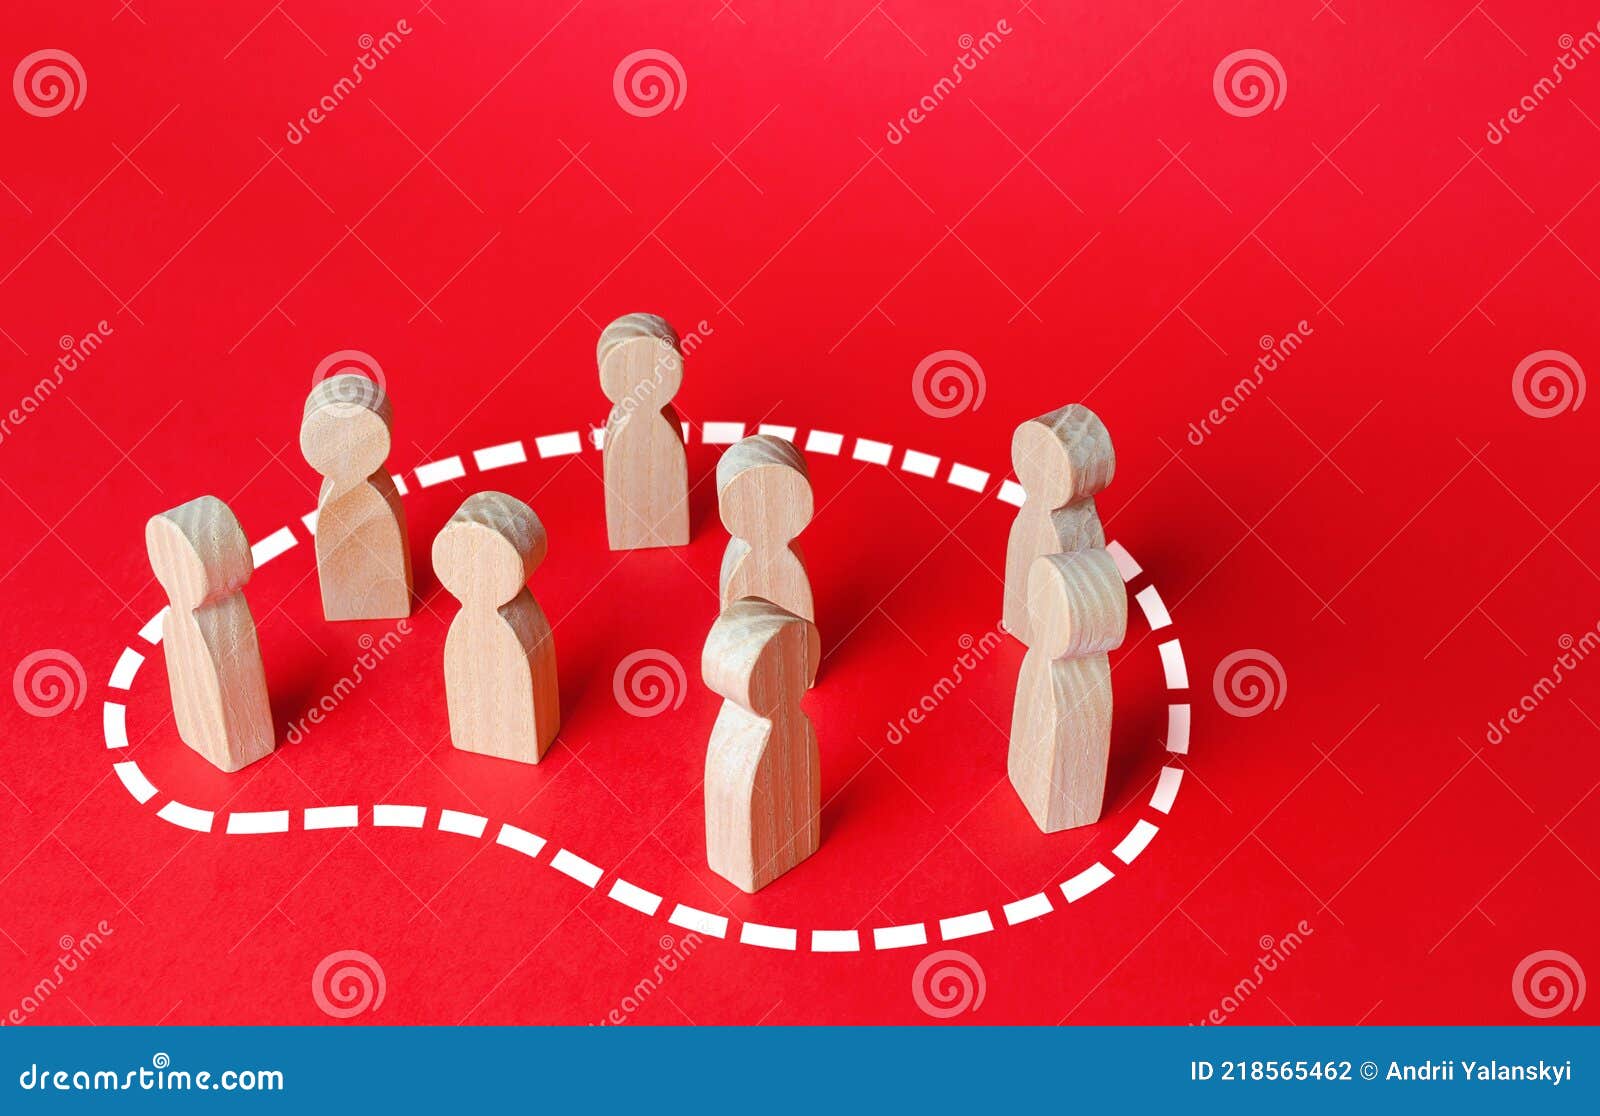 a group of people is circled in dotted line. grouping people, teaming up. society and community concept. target audience